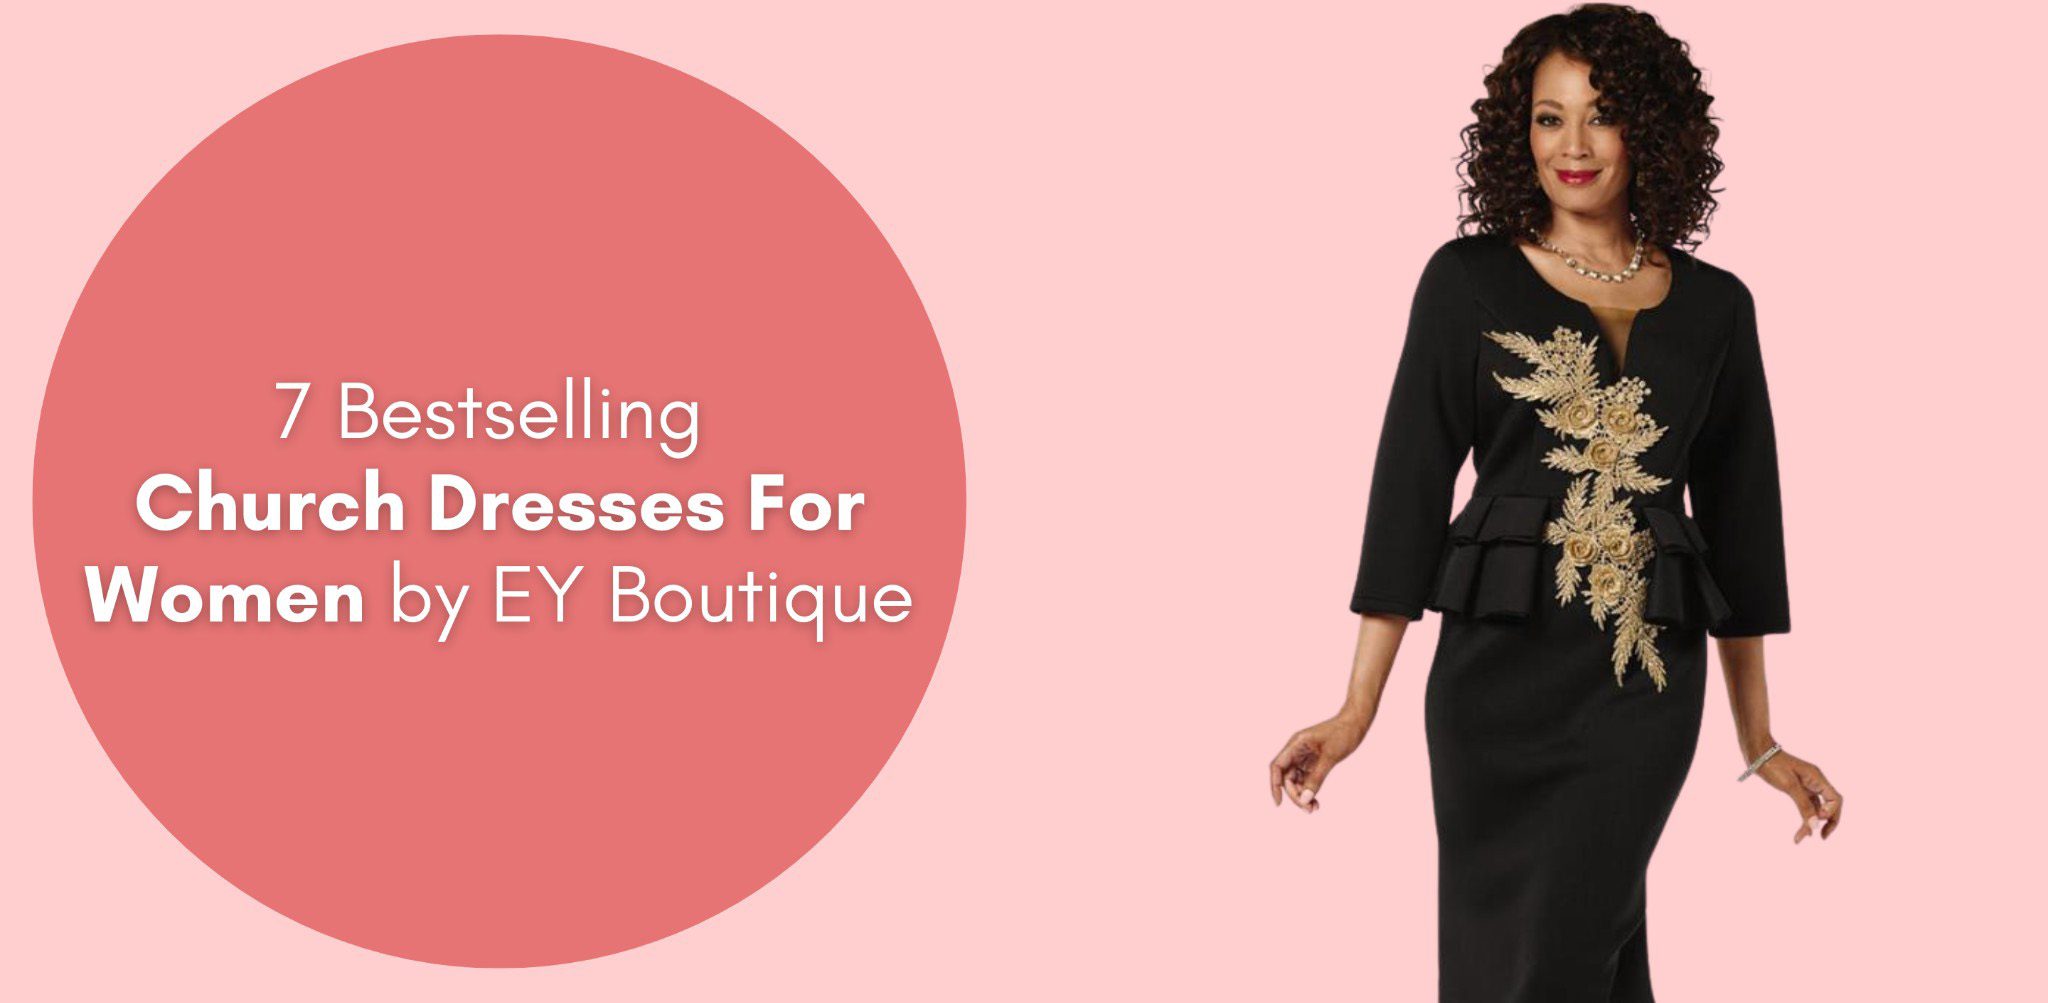 7 Bestselling Church Dresses For Women by EY Boutique